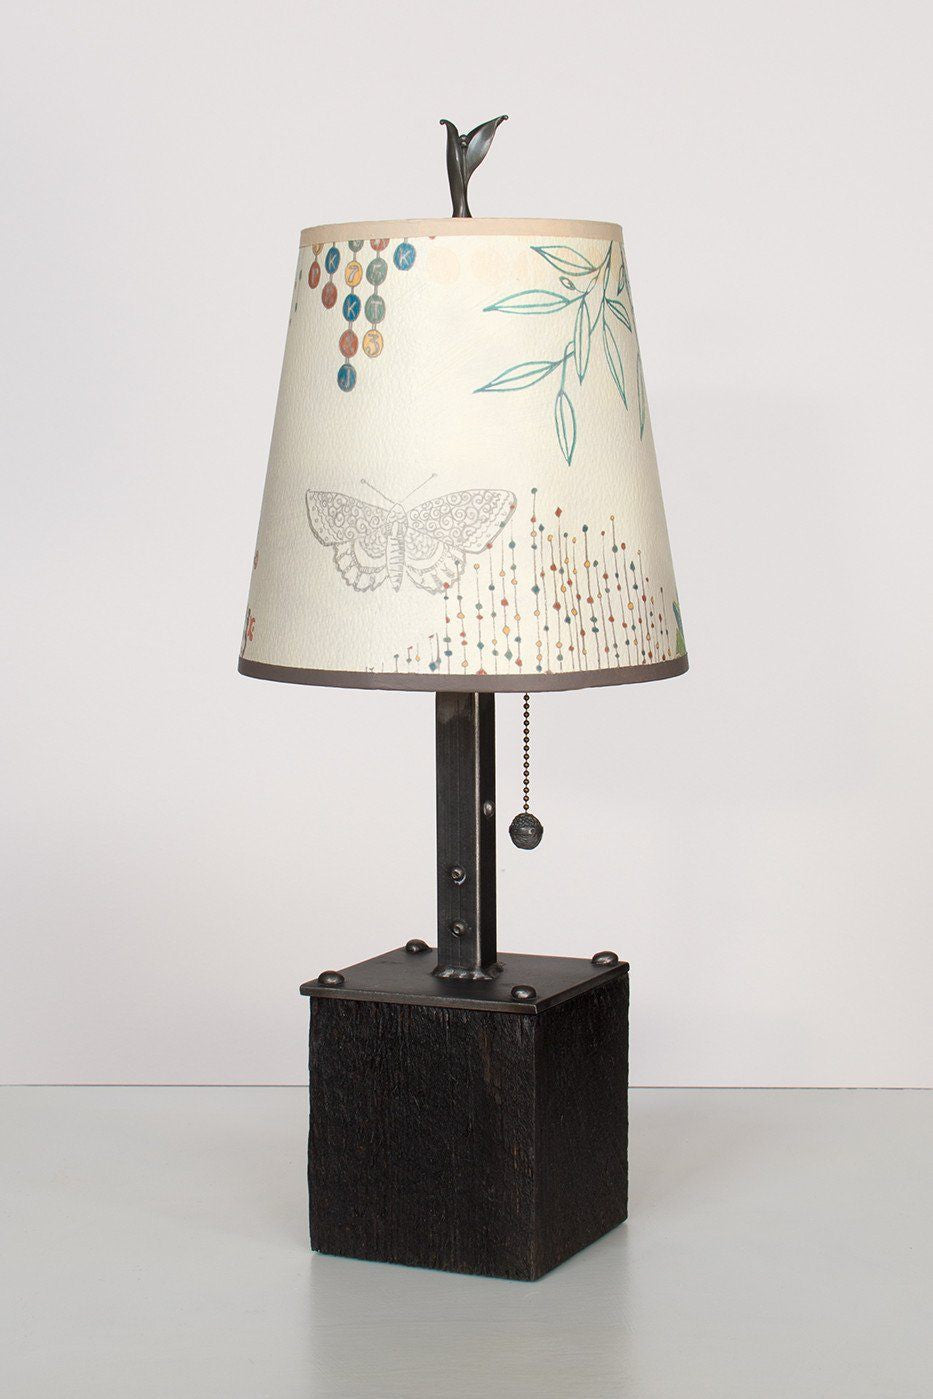 Steel Table Lamp on Reclaimed Wood with Small Drum Shade in Ecru Journey Lit